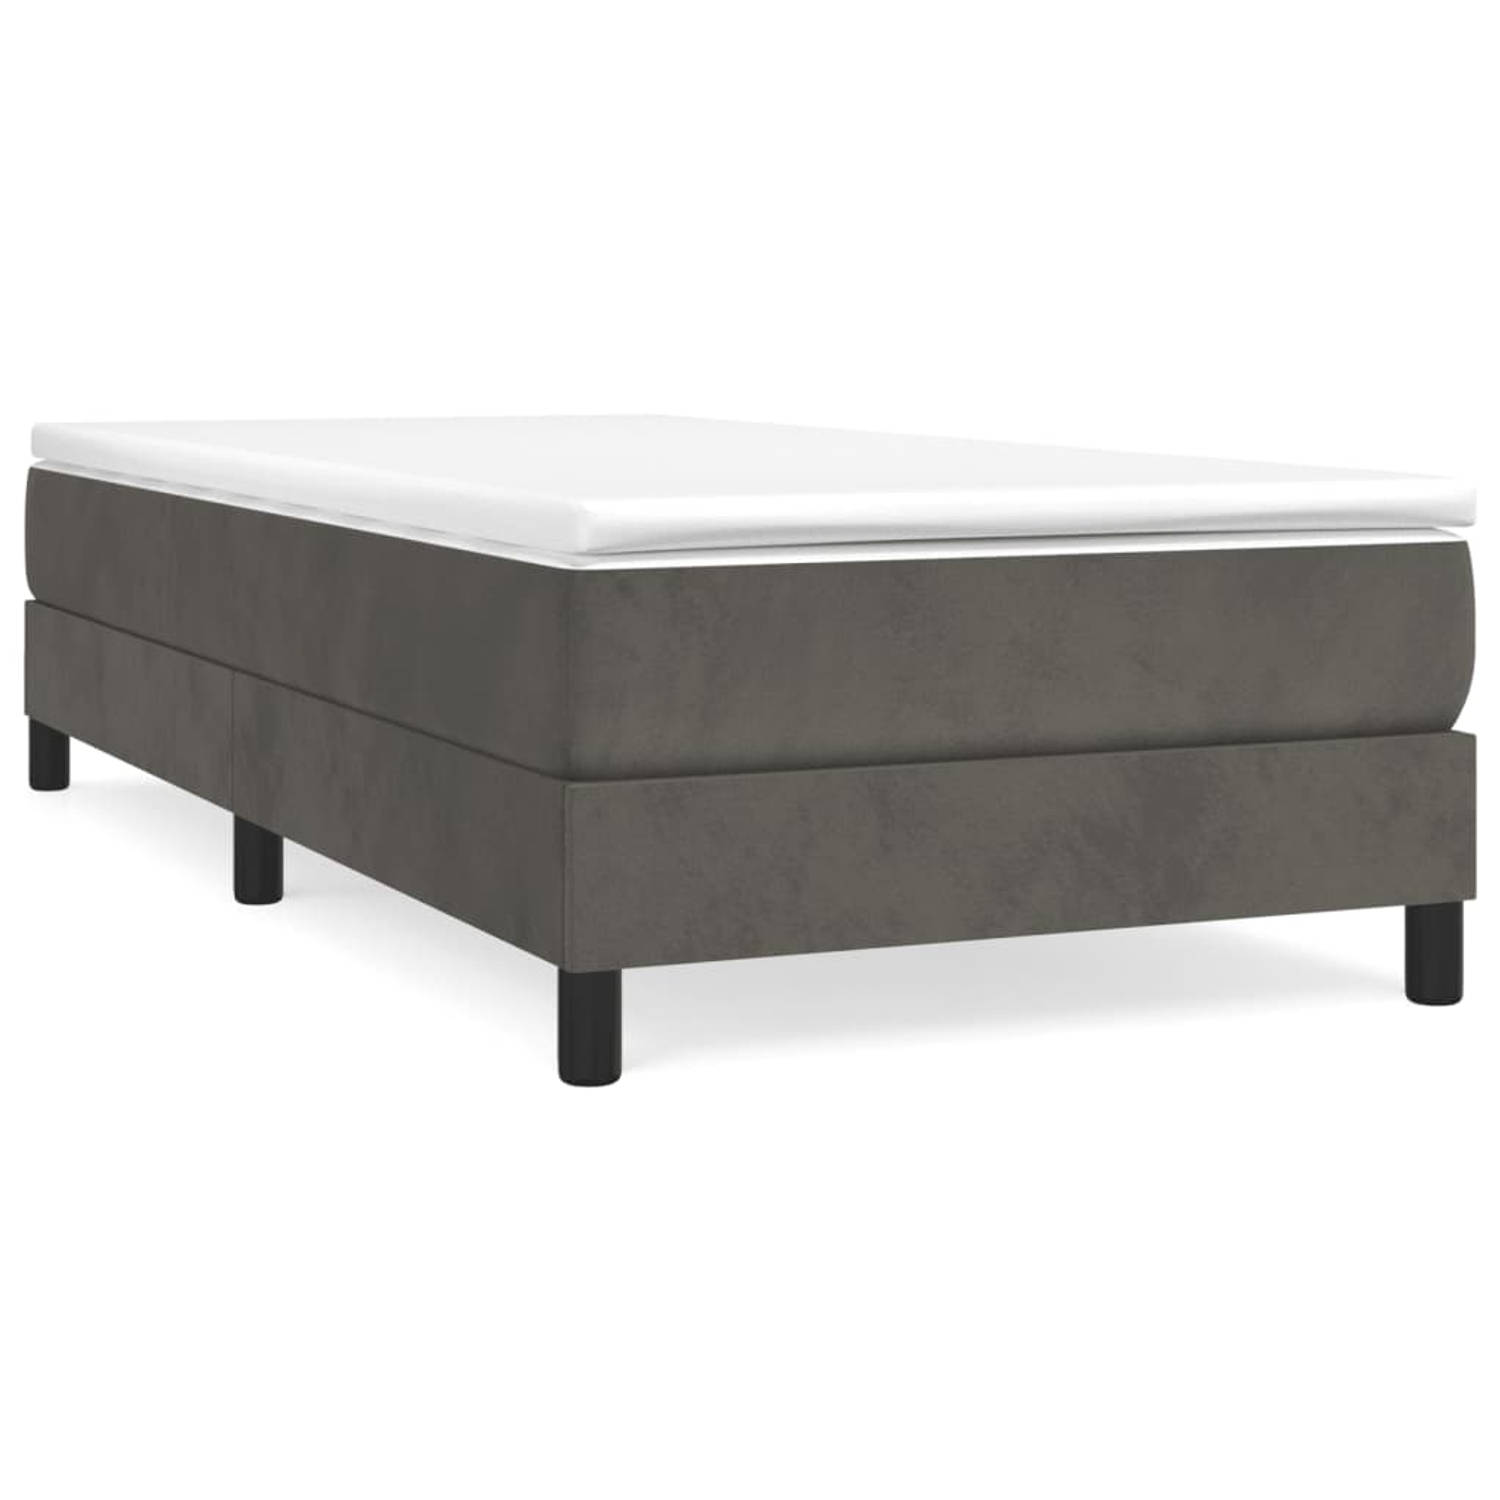 The Living Store Boxspringframe fluweel donkergrijs 100x200 cm - Bed